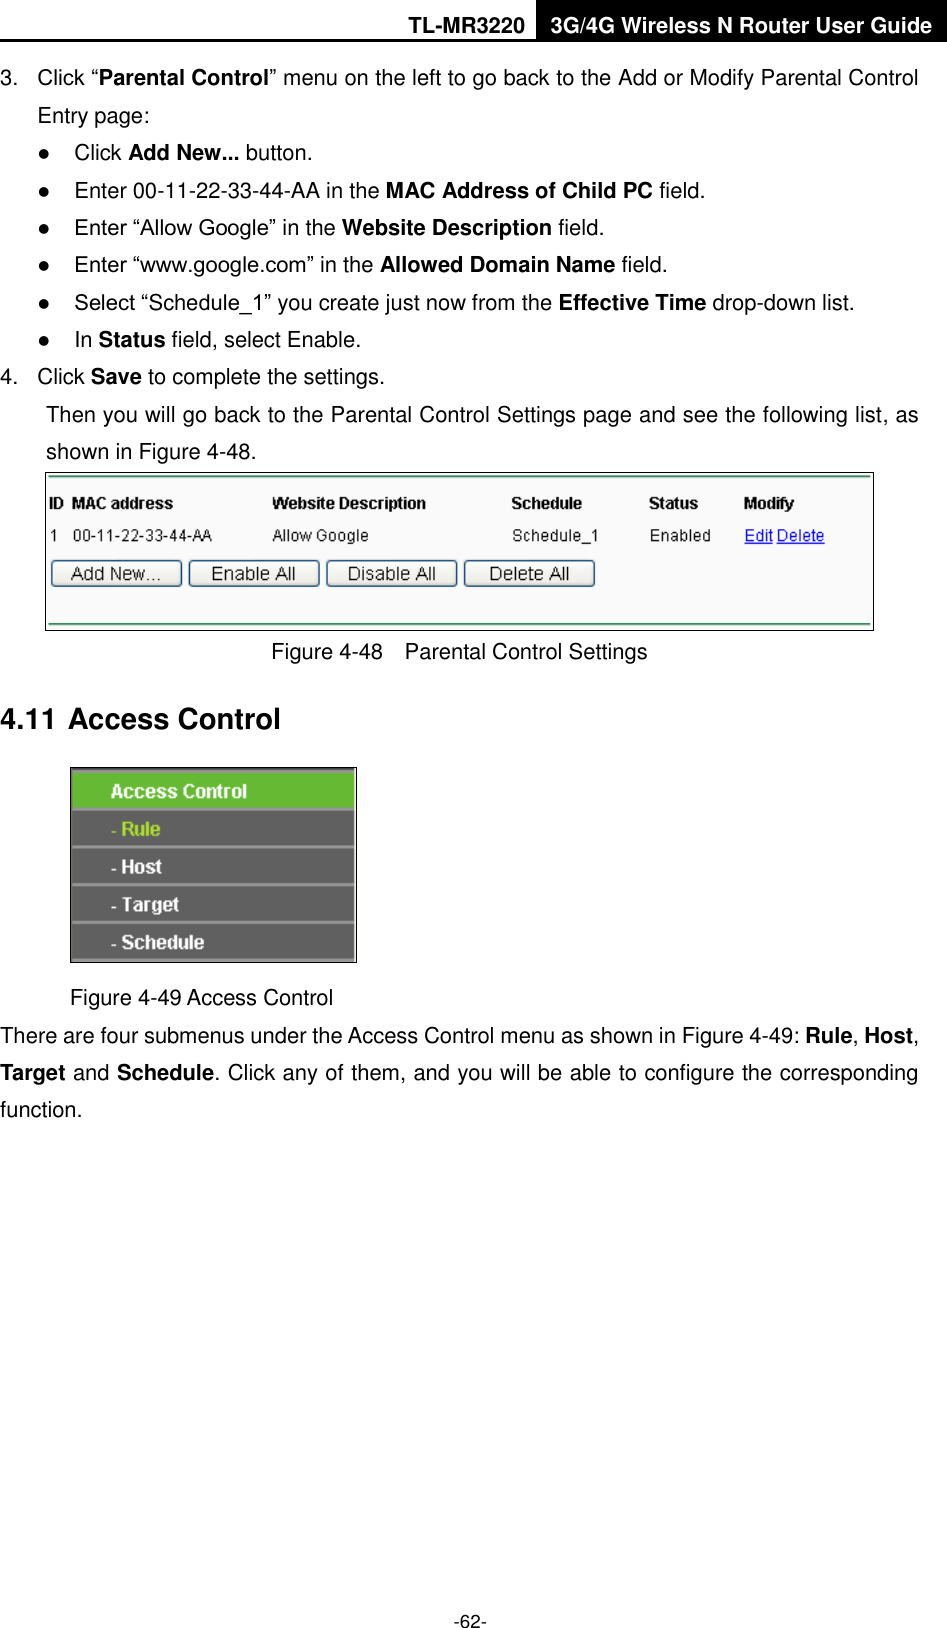 TL-MR3220 3G/4G Wireless N Router User Guide  -62- 3. Click “Parental Control” menu on the left to go back to the Add or Modify Parental Control Entry page:    Click Add New... button.    Enter 00-11-22-33-44-AA in the MAC Address of Child PC field.    Enter “Allow Google” in the Website Description field.    Enter “www.google.com” in the Allowed Domain Name field.    Select “Schedule_1” you create just now from the Effective Time drop-down list.    In Status field, select Enable.   4.  Click Save to complete the settings. Then you will go back to the Parental Control Settings page and see the following list, as shown in Figure 4-48.  Figure 4-48  Parental Control Settings 4.11 Access Control  Figure 4-49 Access Control There are four submenus under the Access Control menu as shown in Figure 4-49: Rule, Host, Target and Schedule. Click any of them, and you will be able to configure the corresponding function. 